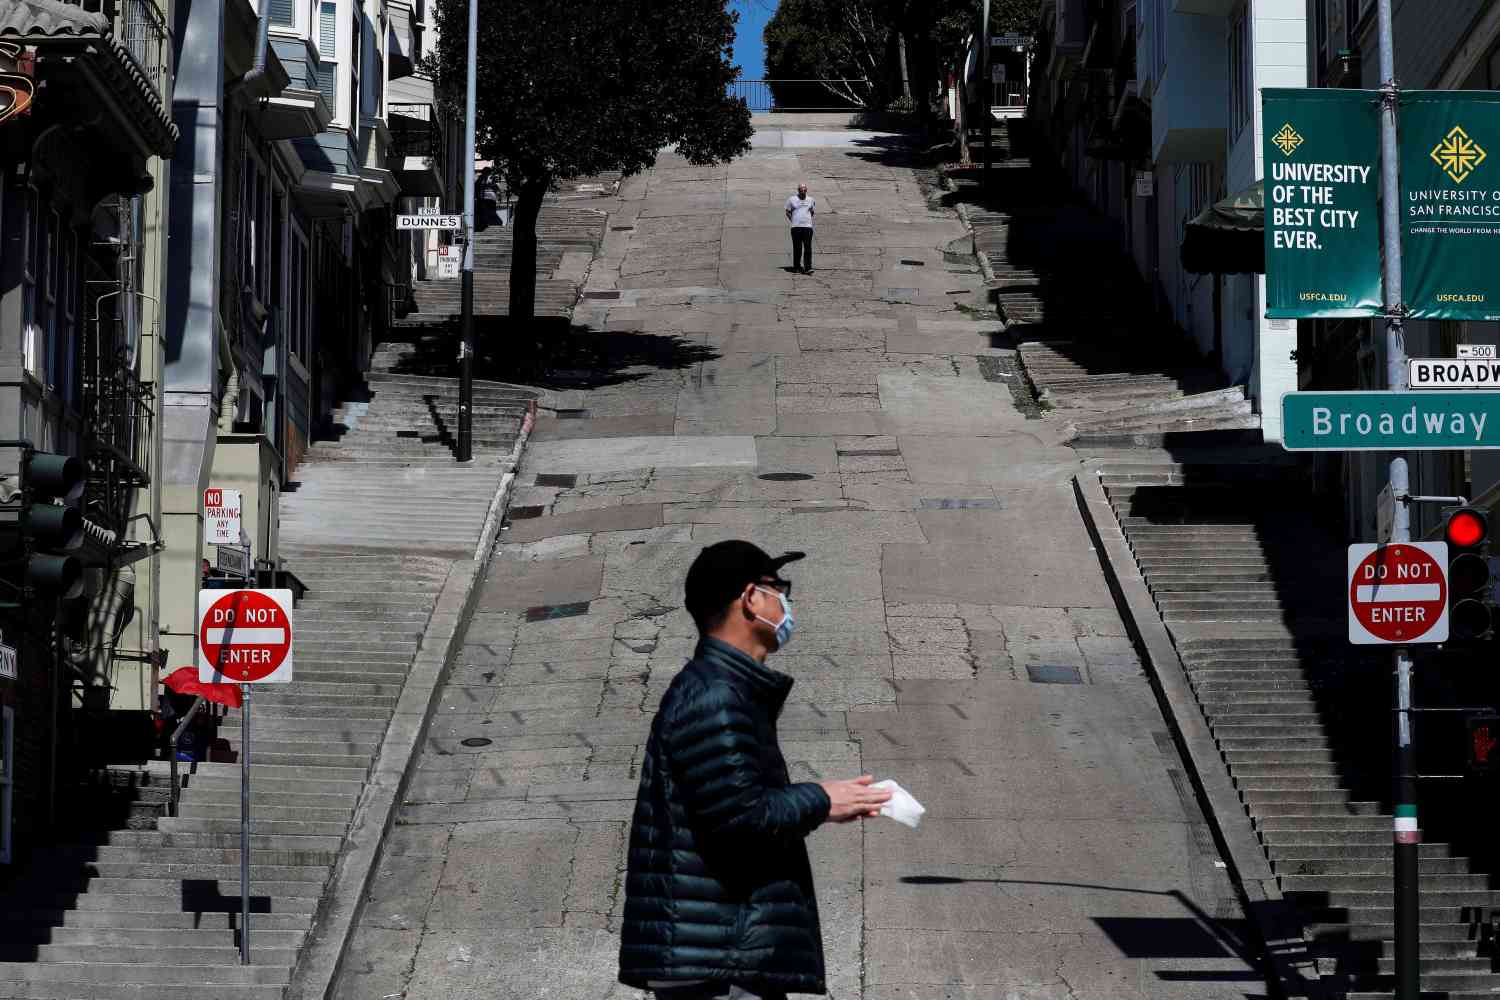 People walk on the streets, a day after California's Governor Gavin Newsom implemented a statewide "stay at home order" directing the state's nearly 40 million residents to stay in their homes for the foreseeable future in the face of the fast-spreading coronavirus disease (COVID-19), in San Francisco, California, U.S. March 20, 2020. REUTERS/Shannon Stapleton     TPX IMAGES OF THE DAY